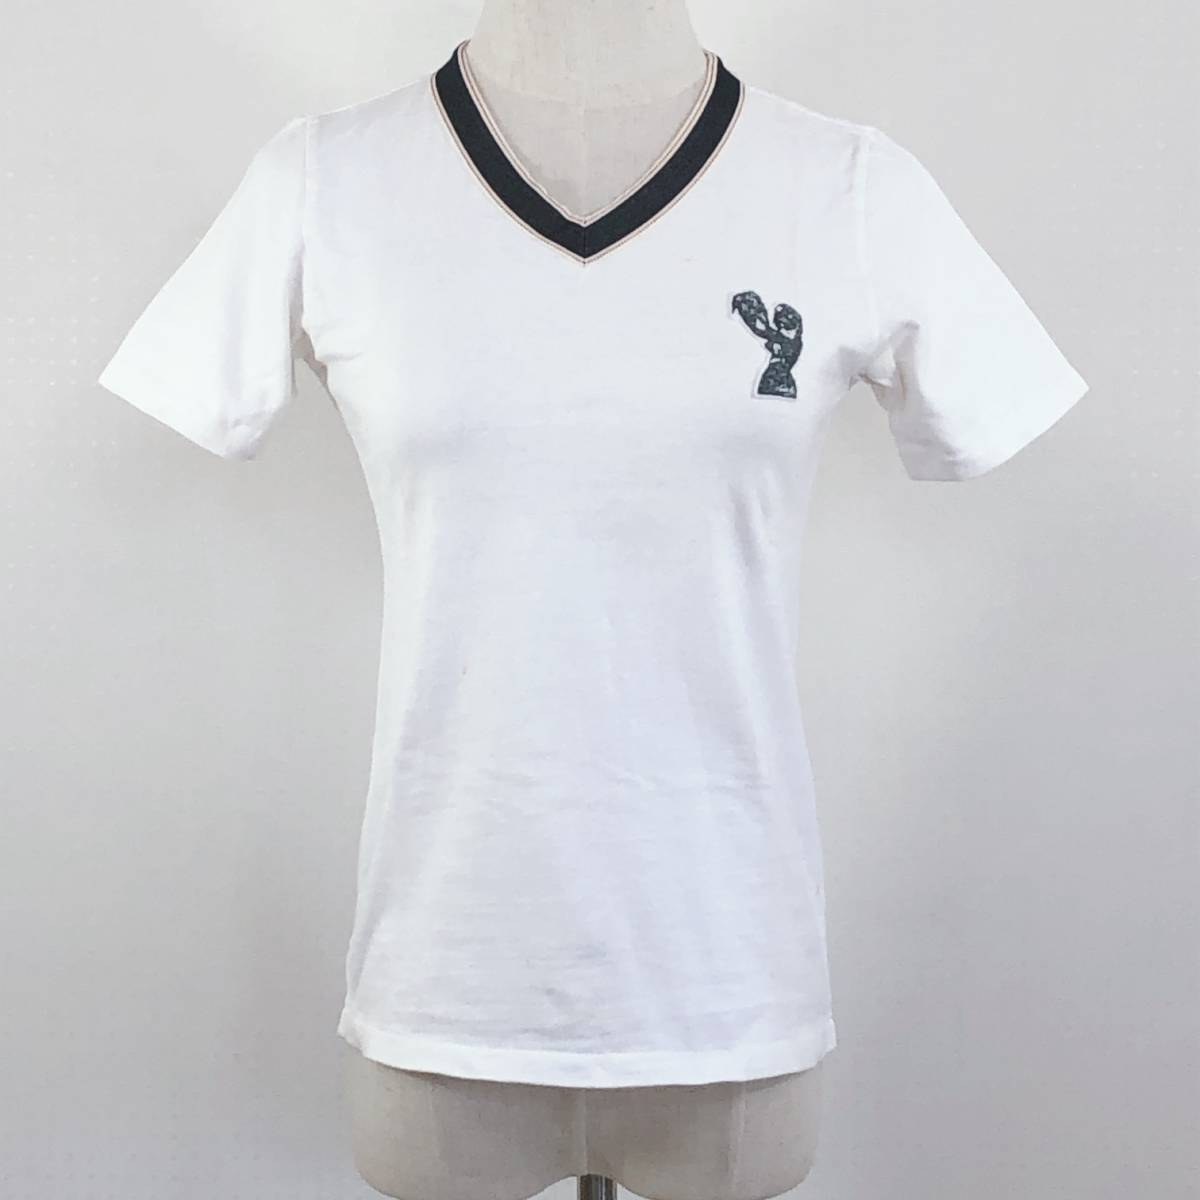 AS0900 CLUTCH clutch tops T-shirt short sleeves badge F size free size white cotton 100% cotton simple tei Lee casual 